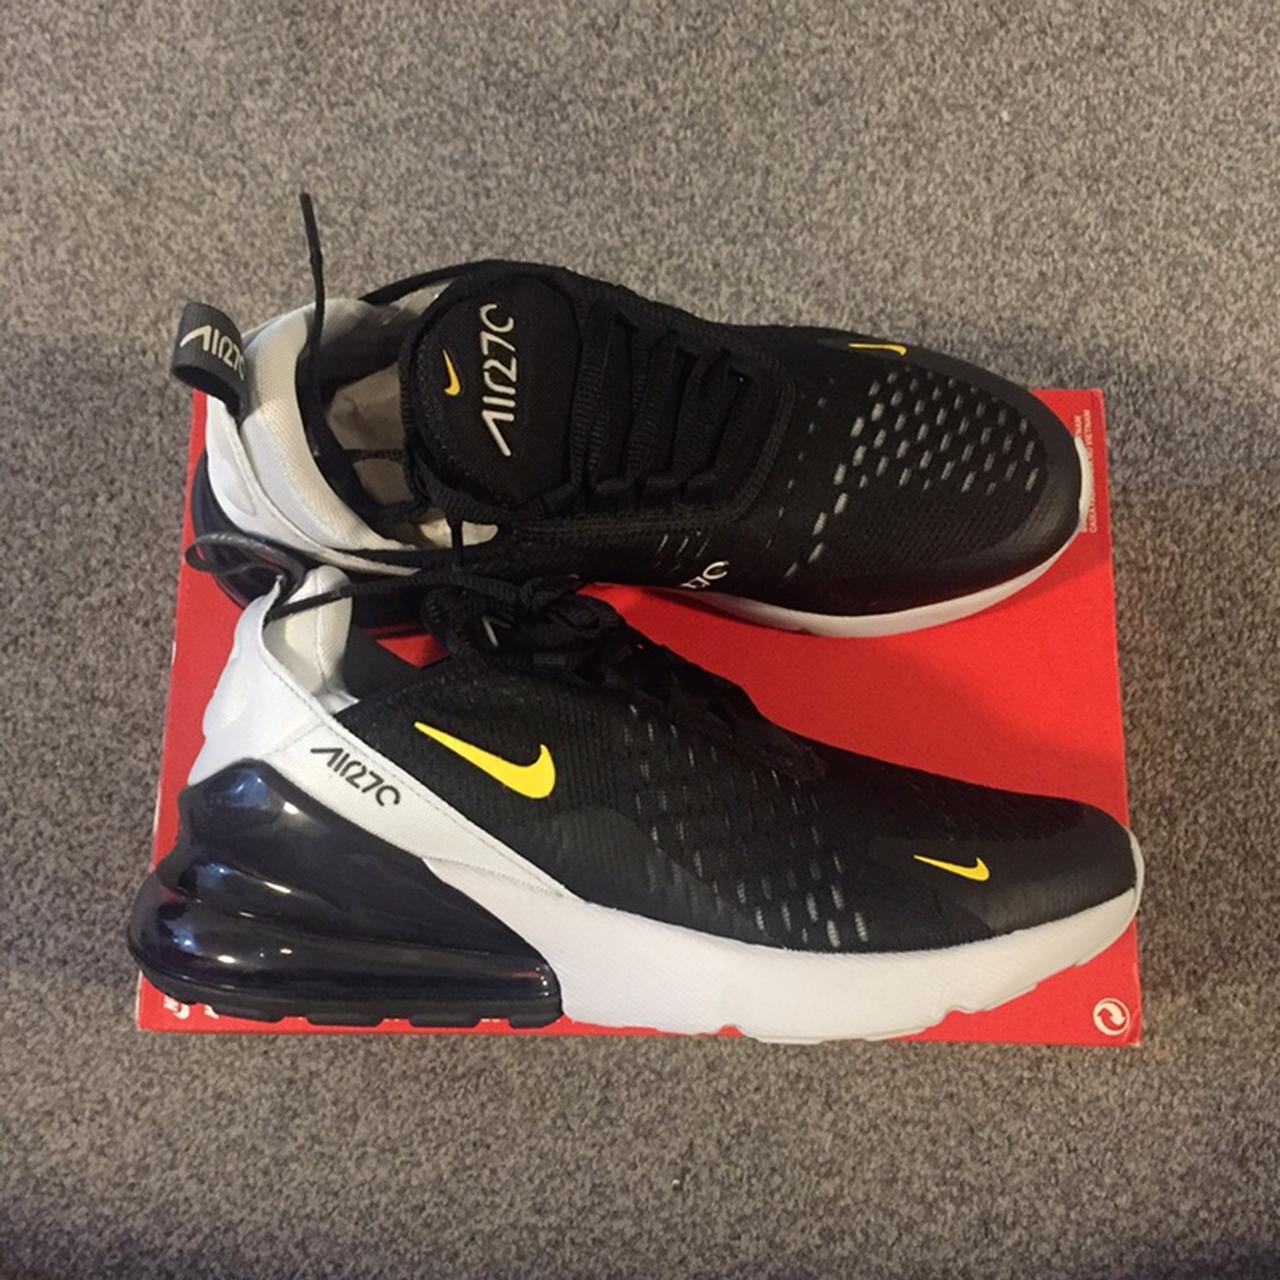 Air Max 270 Ps Trainers